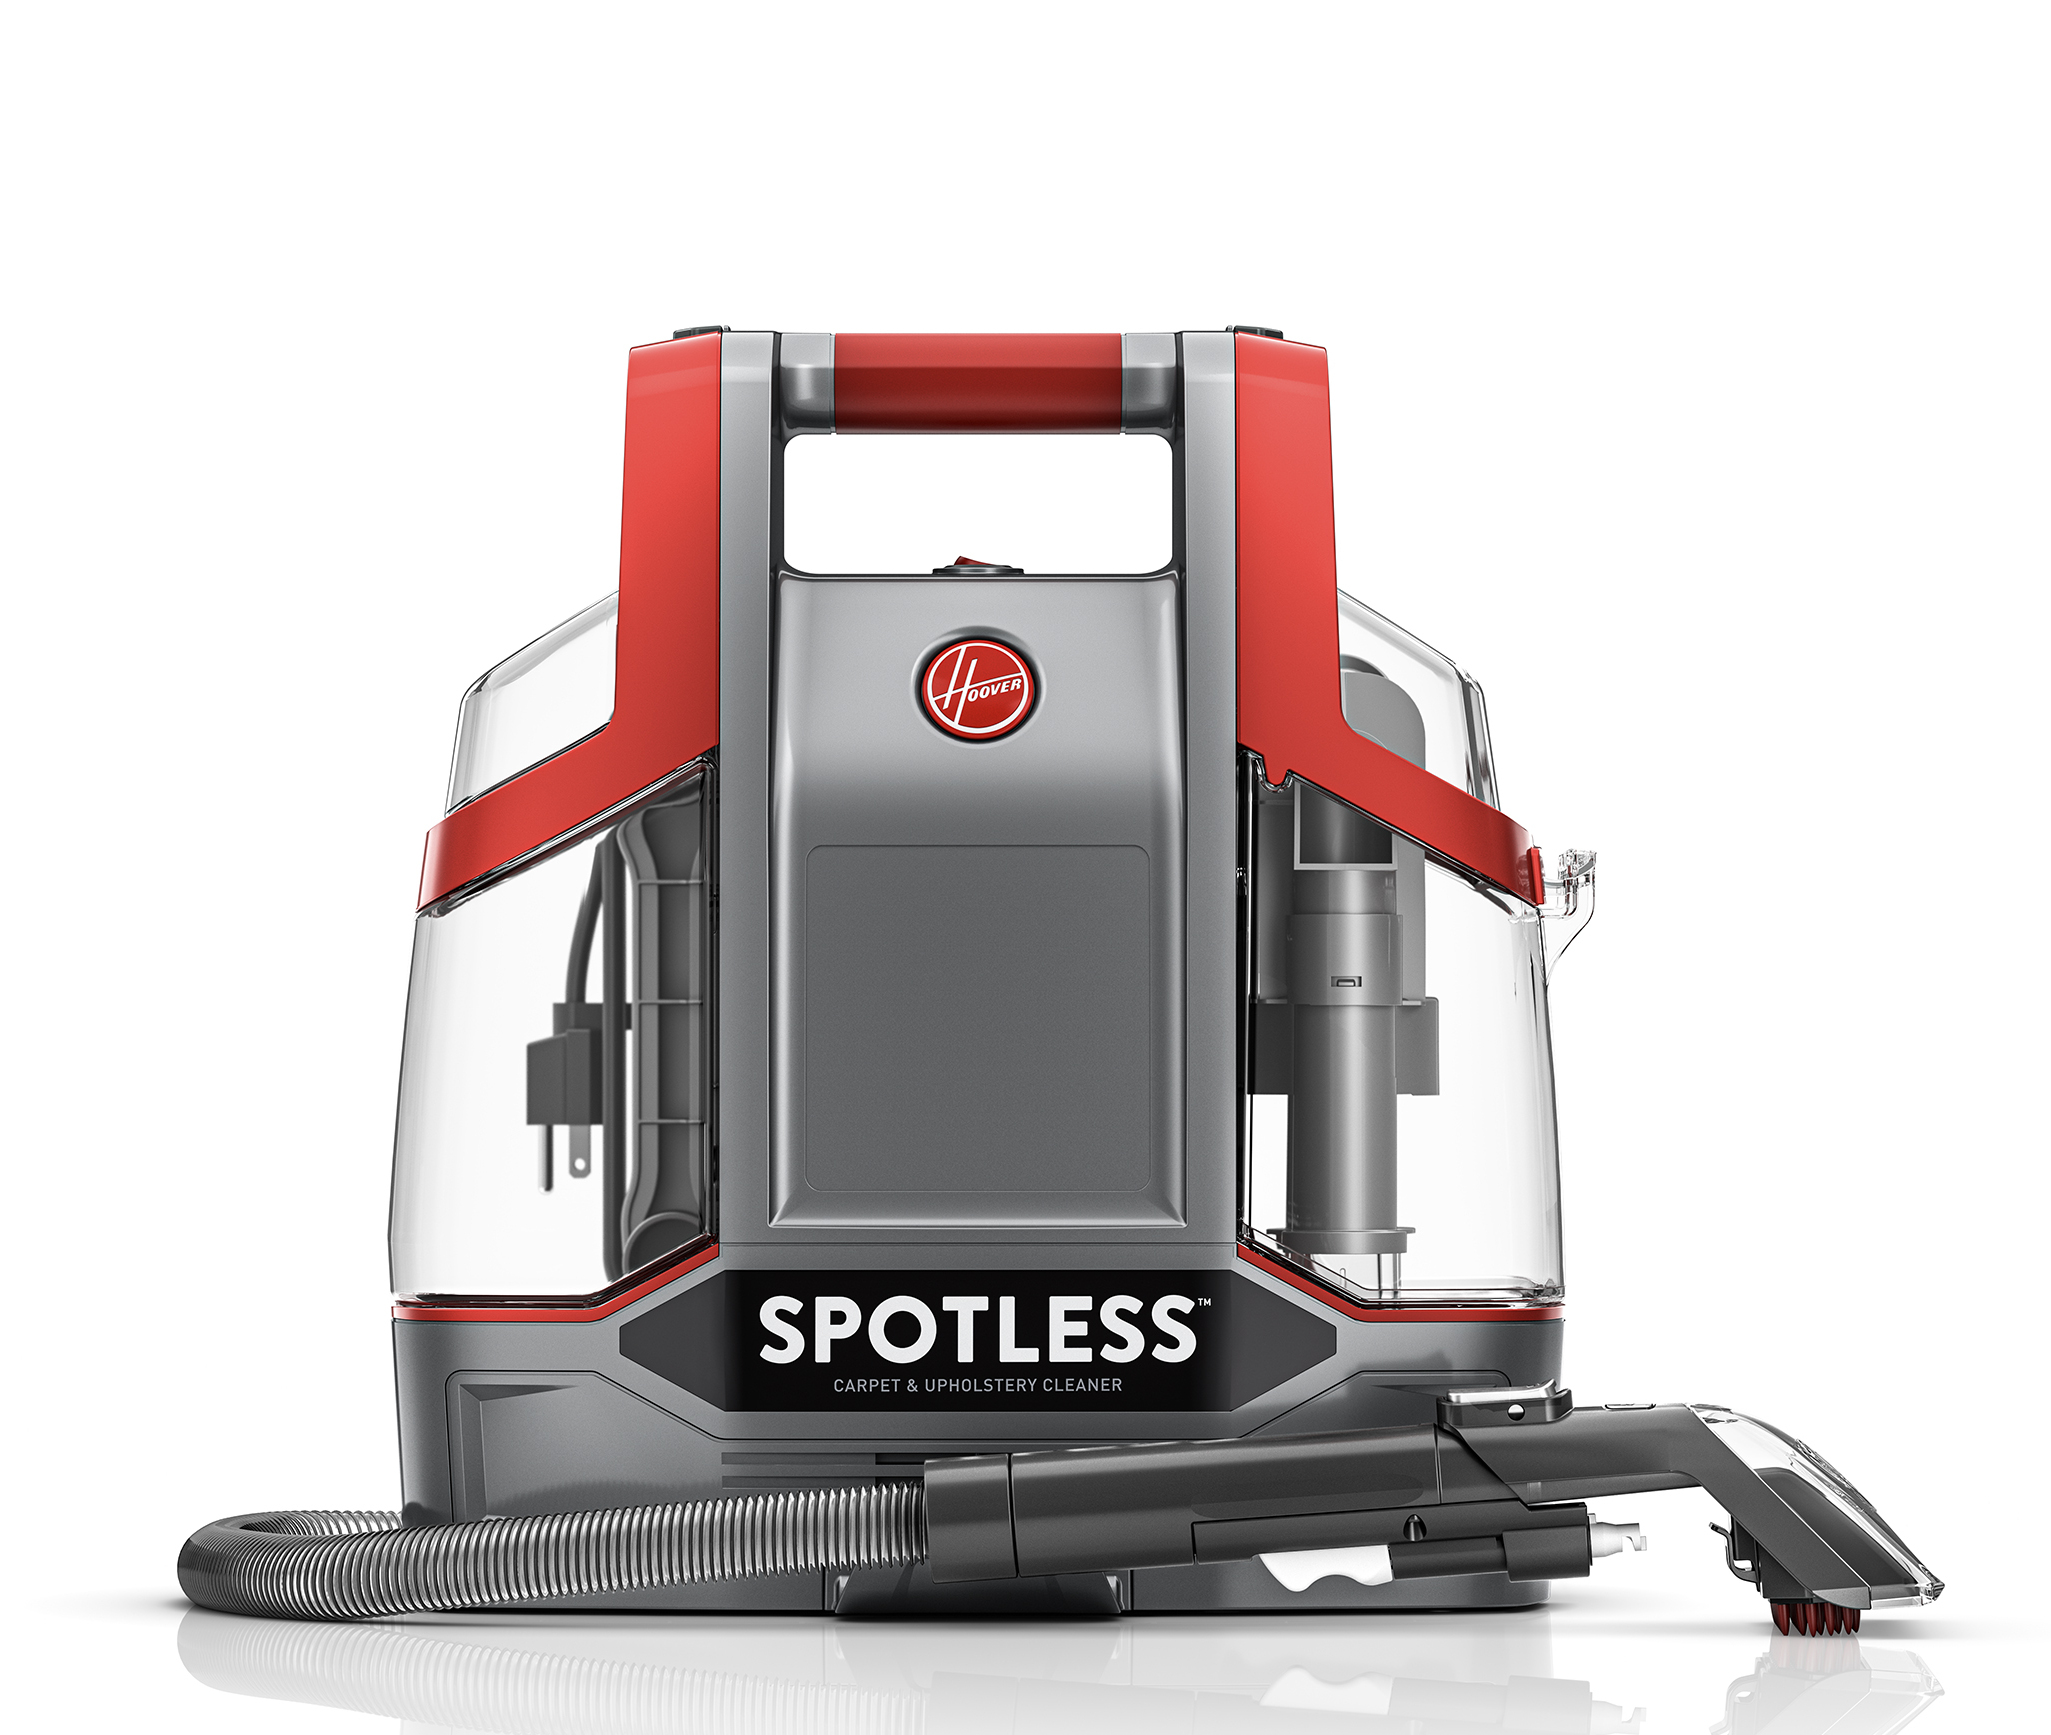 Hoover Spotless Portable Carpet and Upholstery Spot Cleaner, FH11201 - image 1 of 14